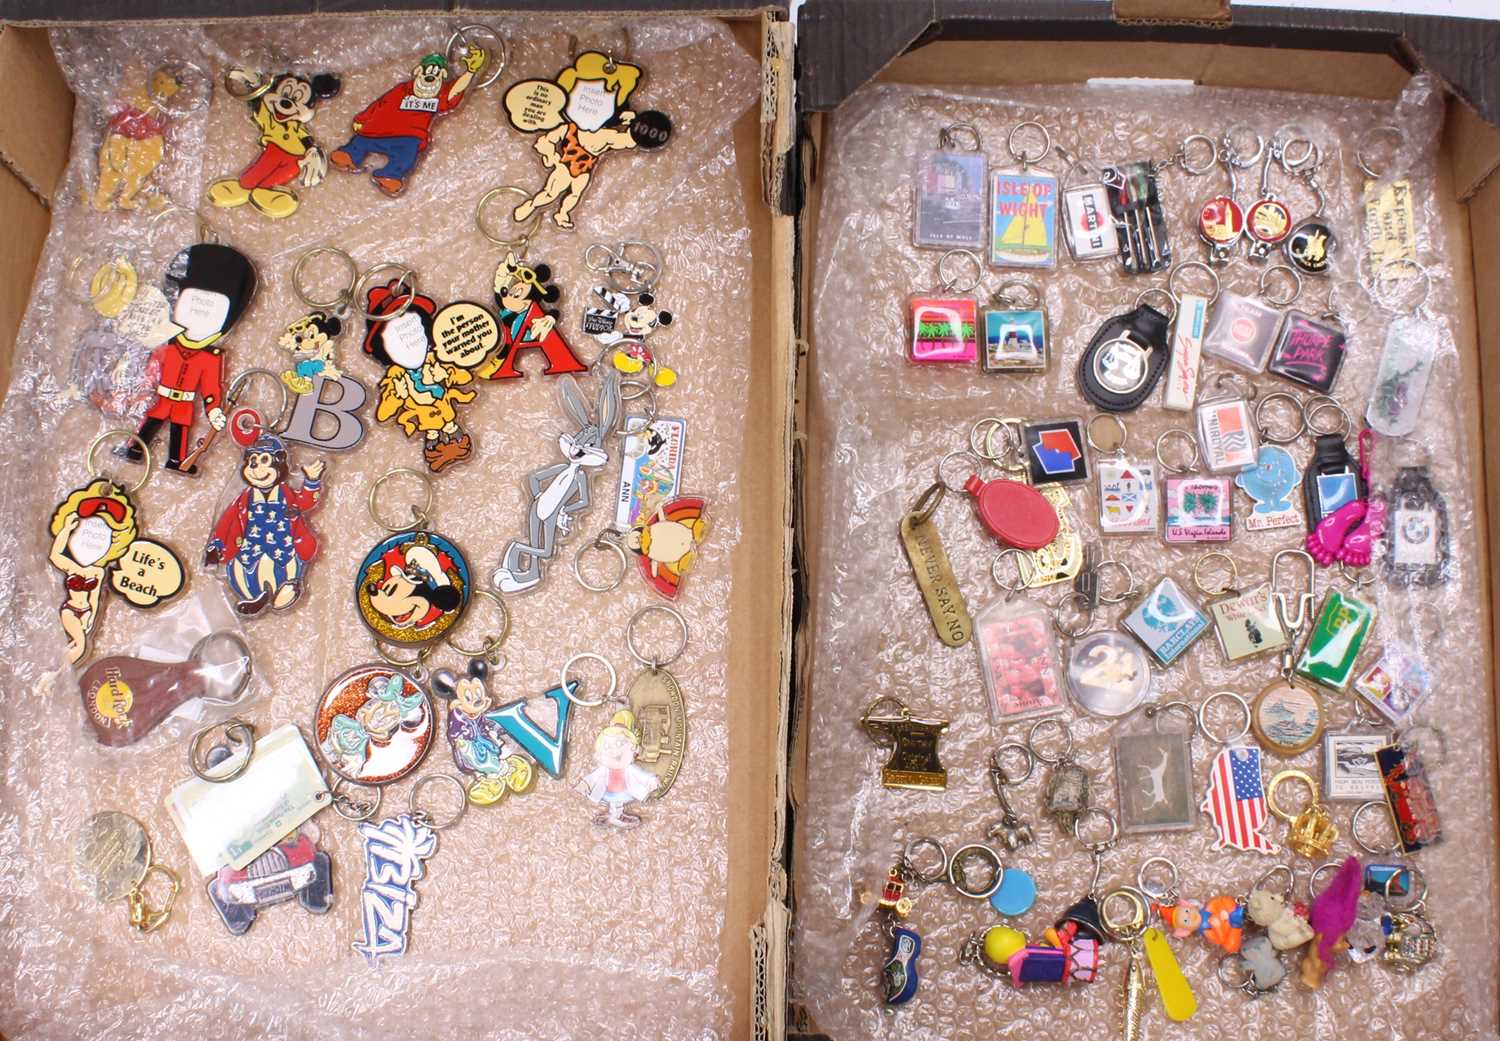 Three trays of Around the World keyrings, to include Isle of Wight, Mickey Mouse, Disneyland, etc